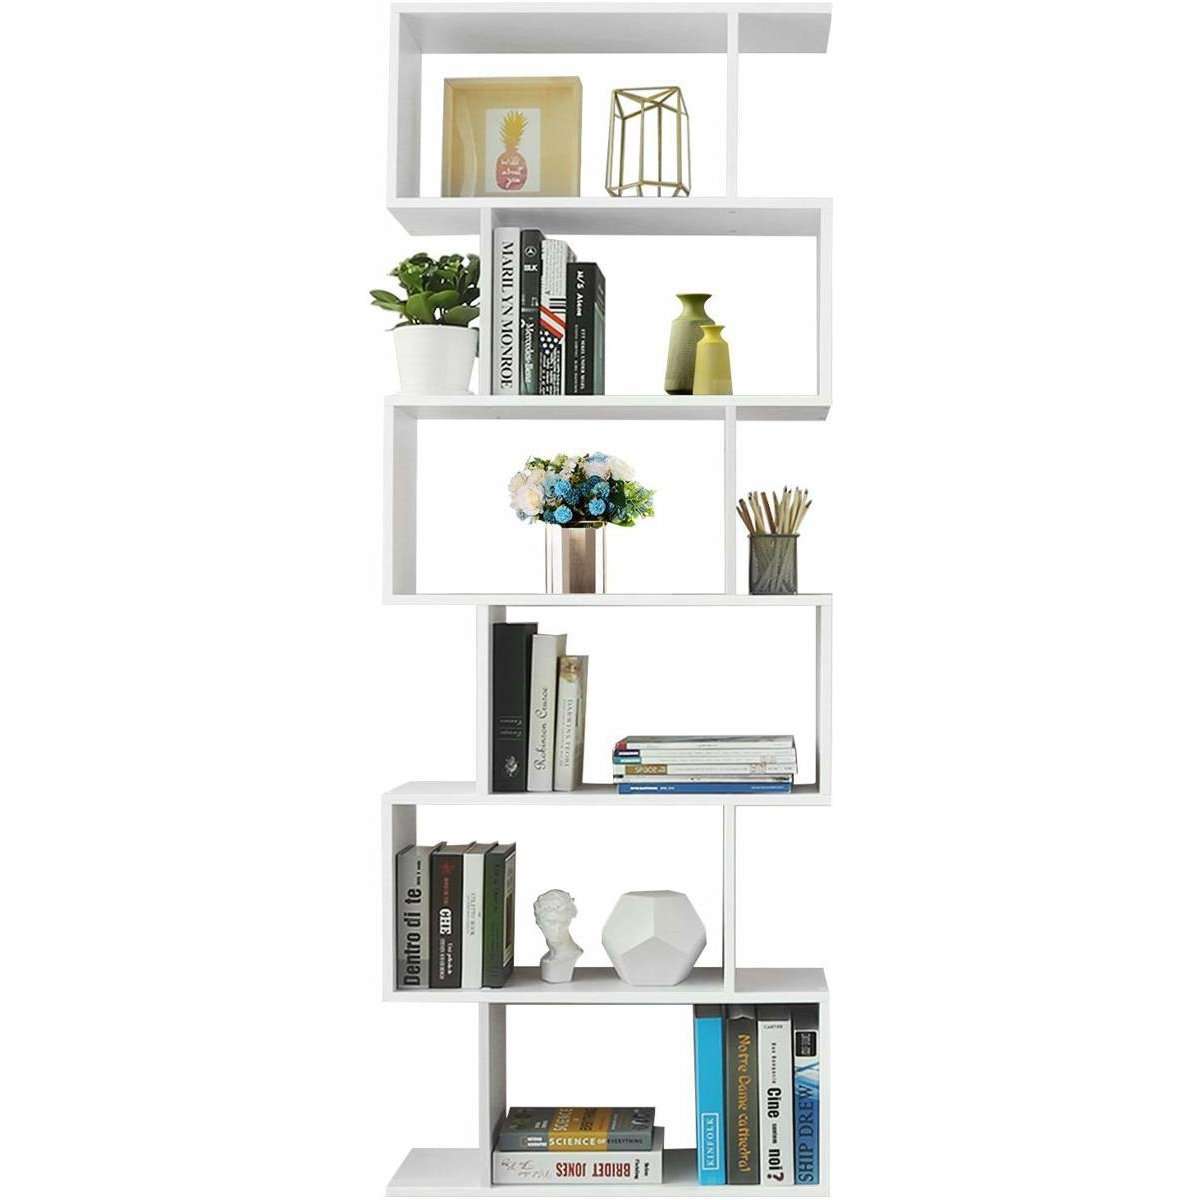 Nancy's Bexley Bookcase - Open Cabinet - 6 Compartments - Engineered Wood - MDF - Black - Brown - 70 x 23.5 x 190.5 cm